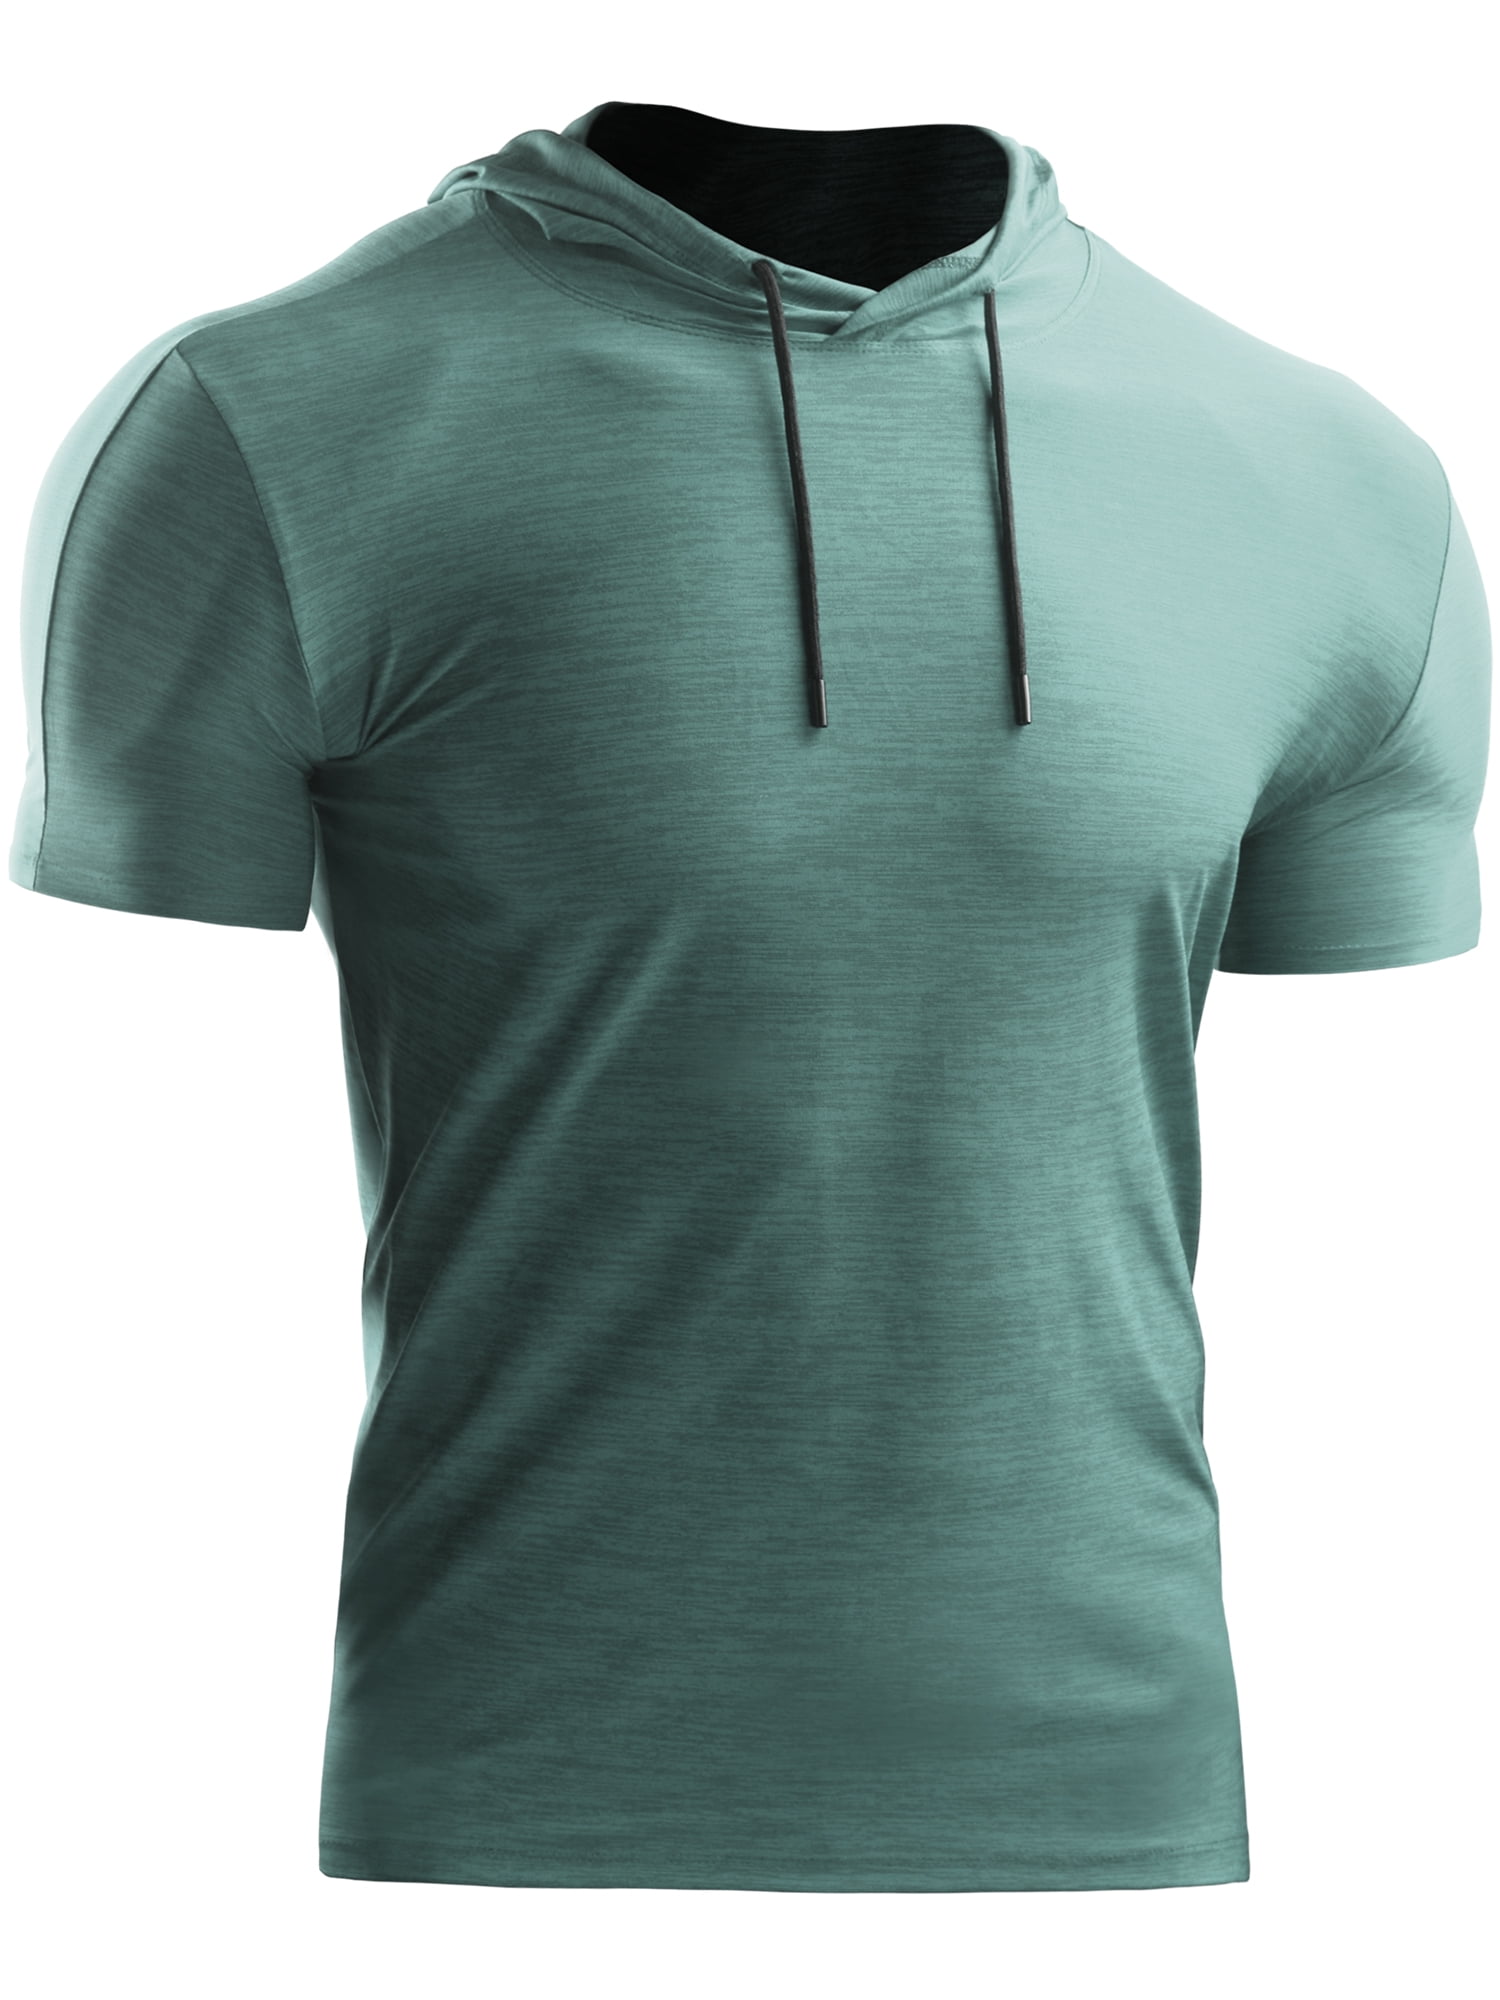 L, White @ TIANRUN Summer Mens Tee Slim Fit Hooded Short Sleeve Muscle Casual Tops Shirts